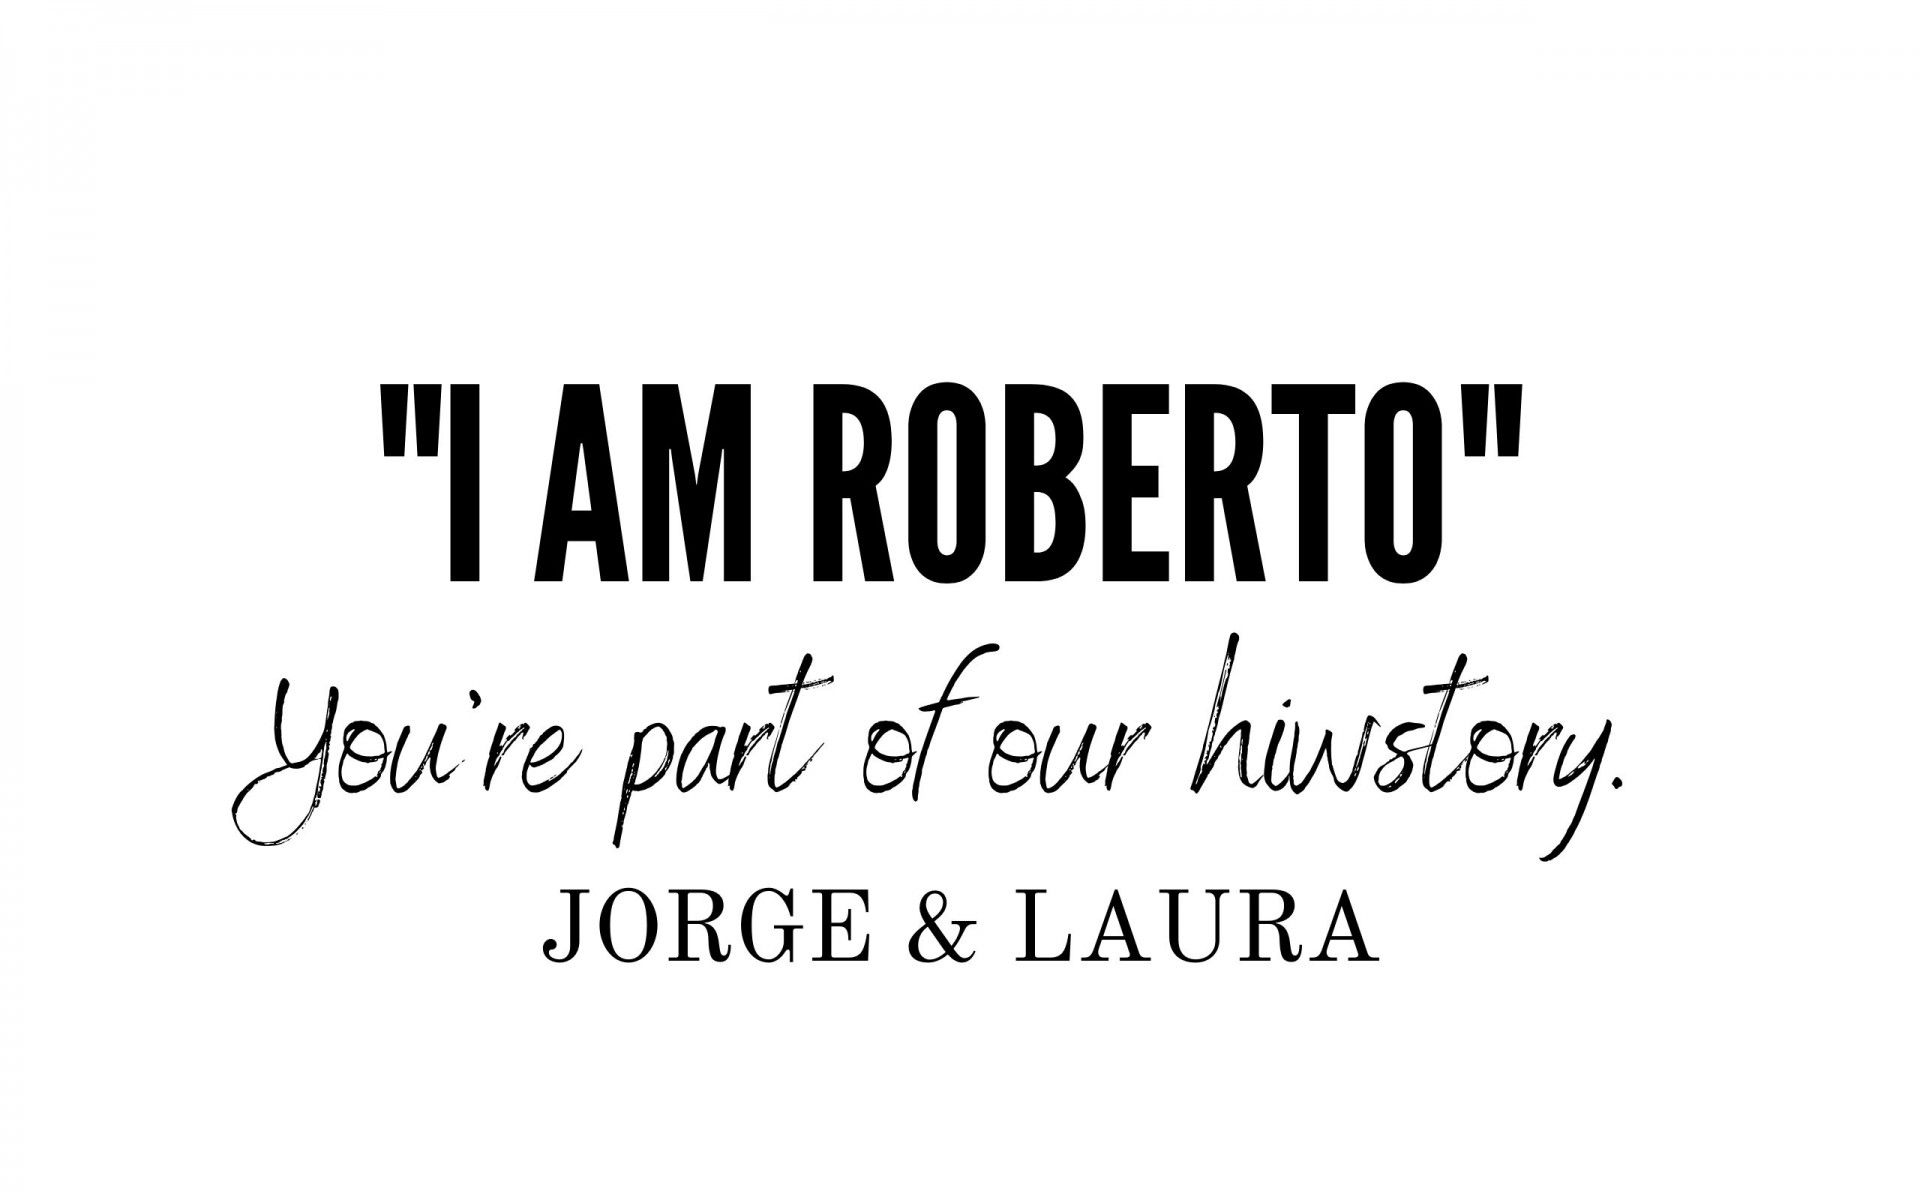 You are part of our history - Jorge & Laura